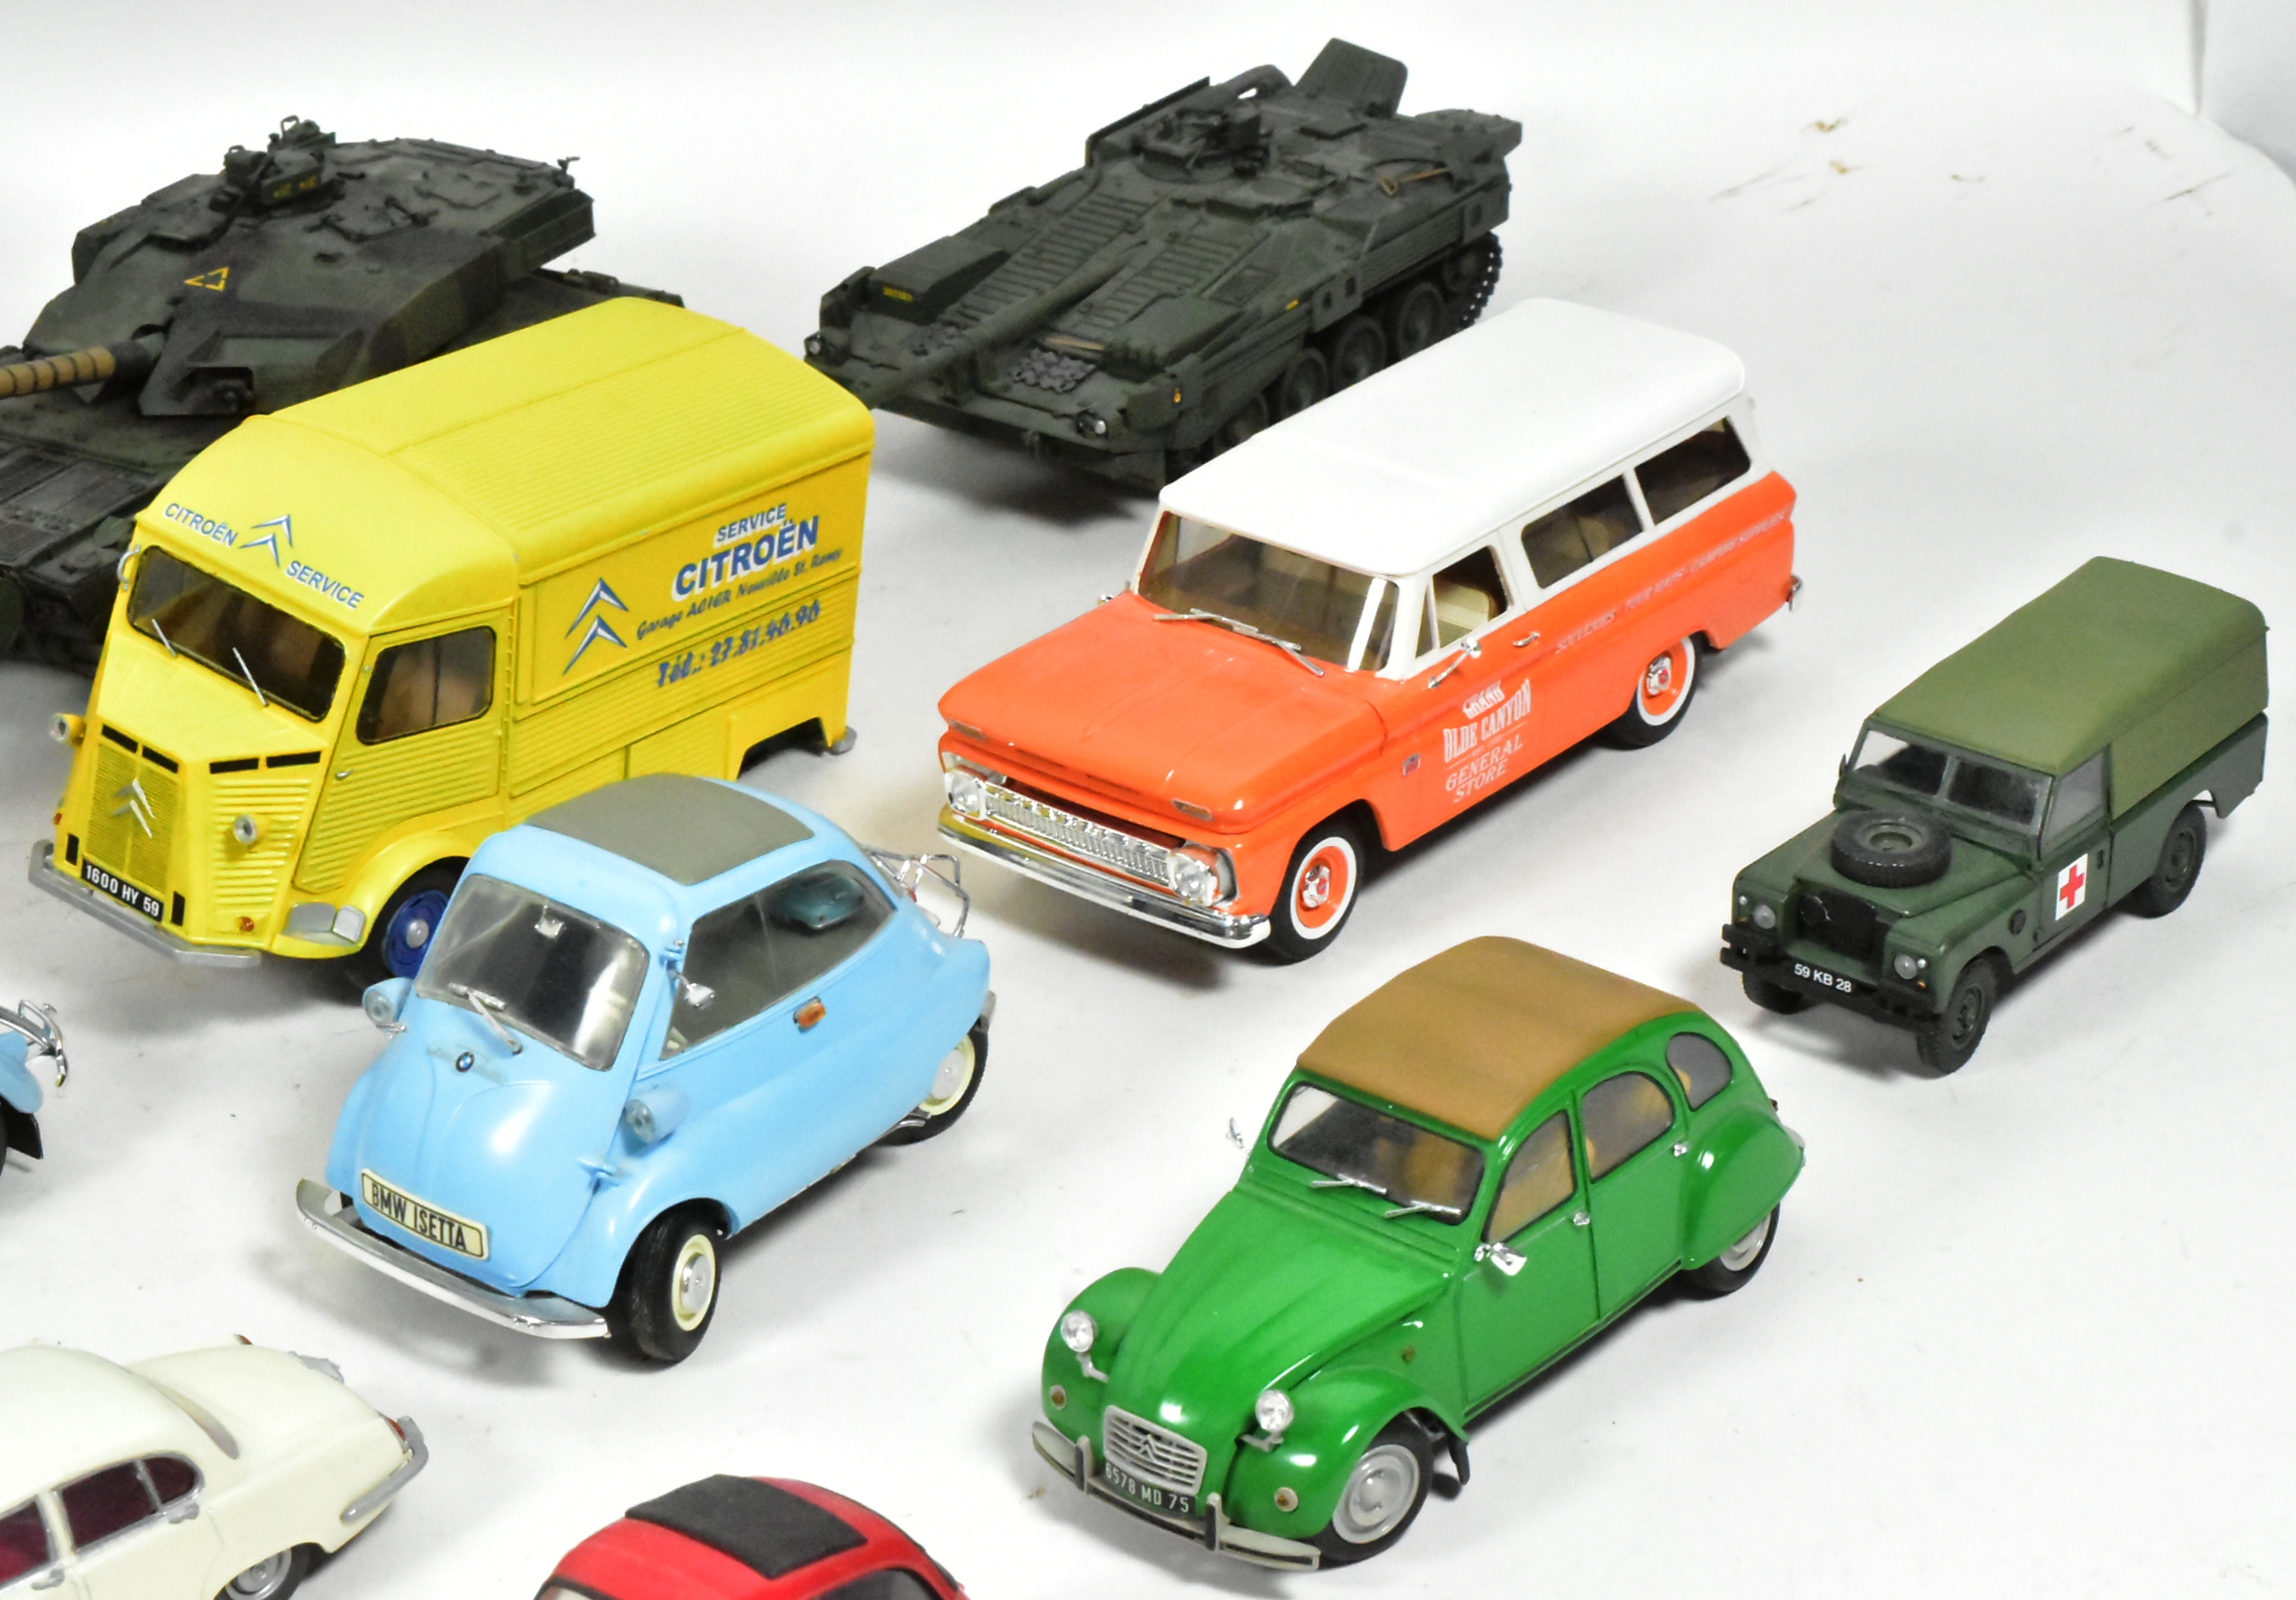 MODEL KITS - COLLECTION OF PRE ASSEMBLED PLASTIC MODEL KITS - Image 2 of 5